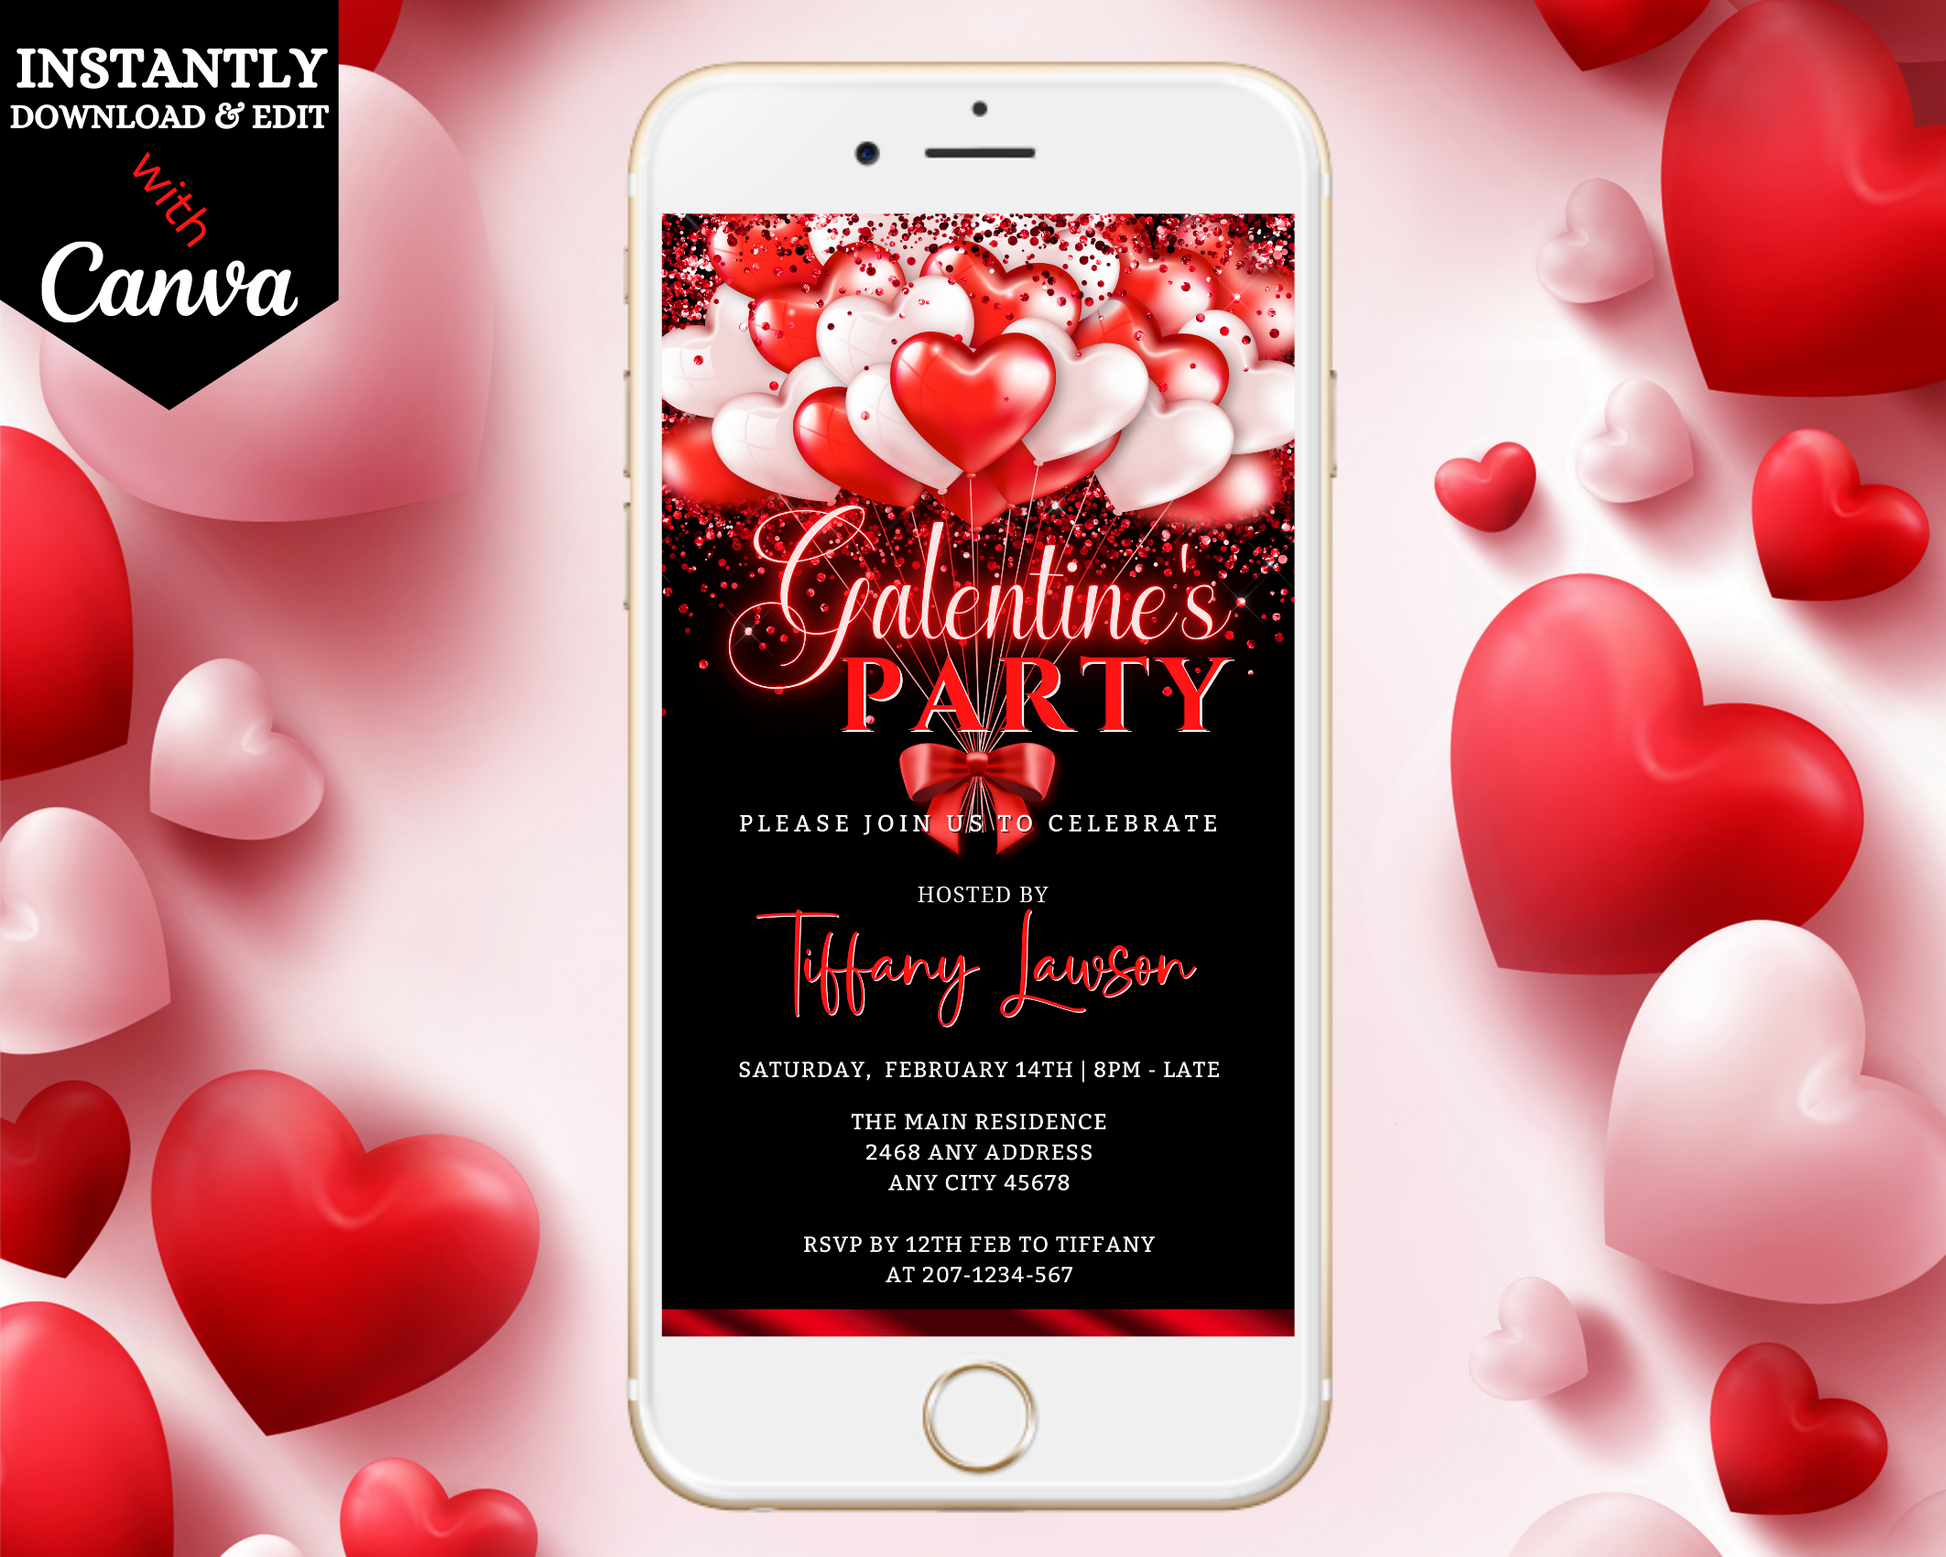 Neon Red White Hearty Balloons Galentines Party Evite displayed on a white smartphone surrounded by red and white hearts.